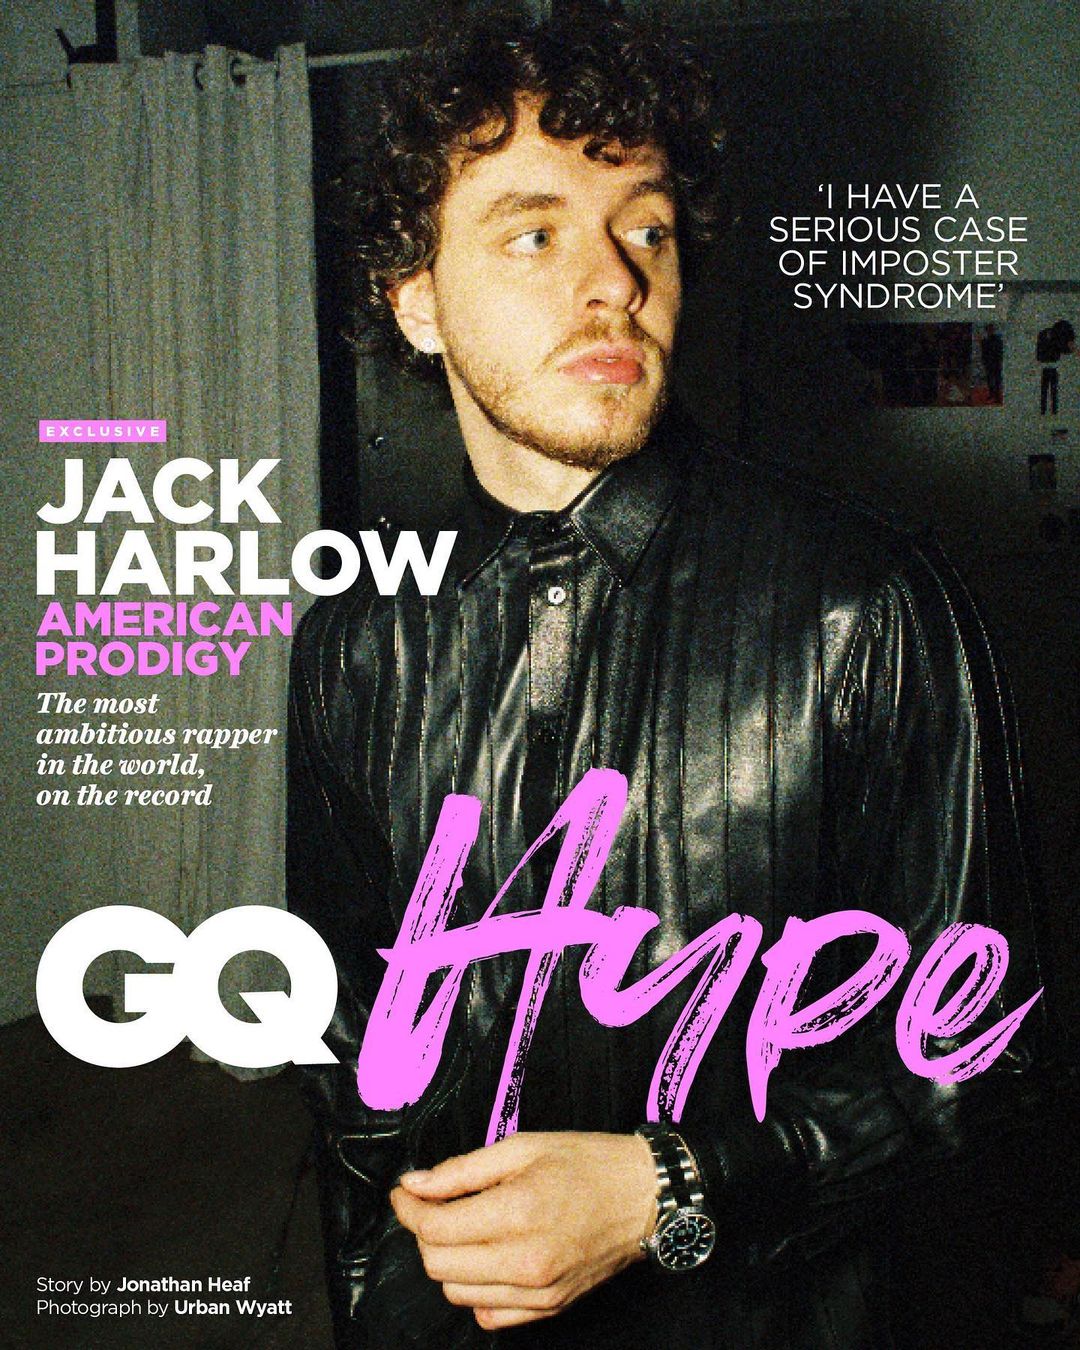 Jack Harlow: ‘I have serious imposter syndrome the whole way through’